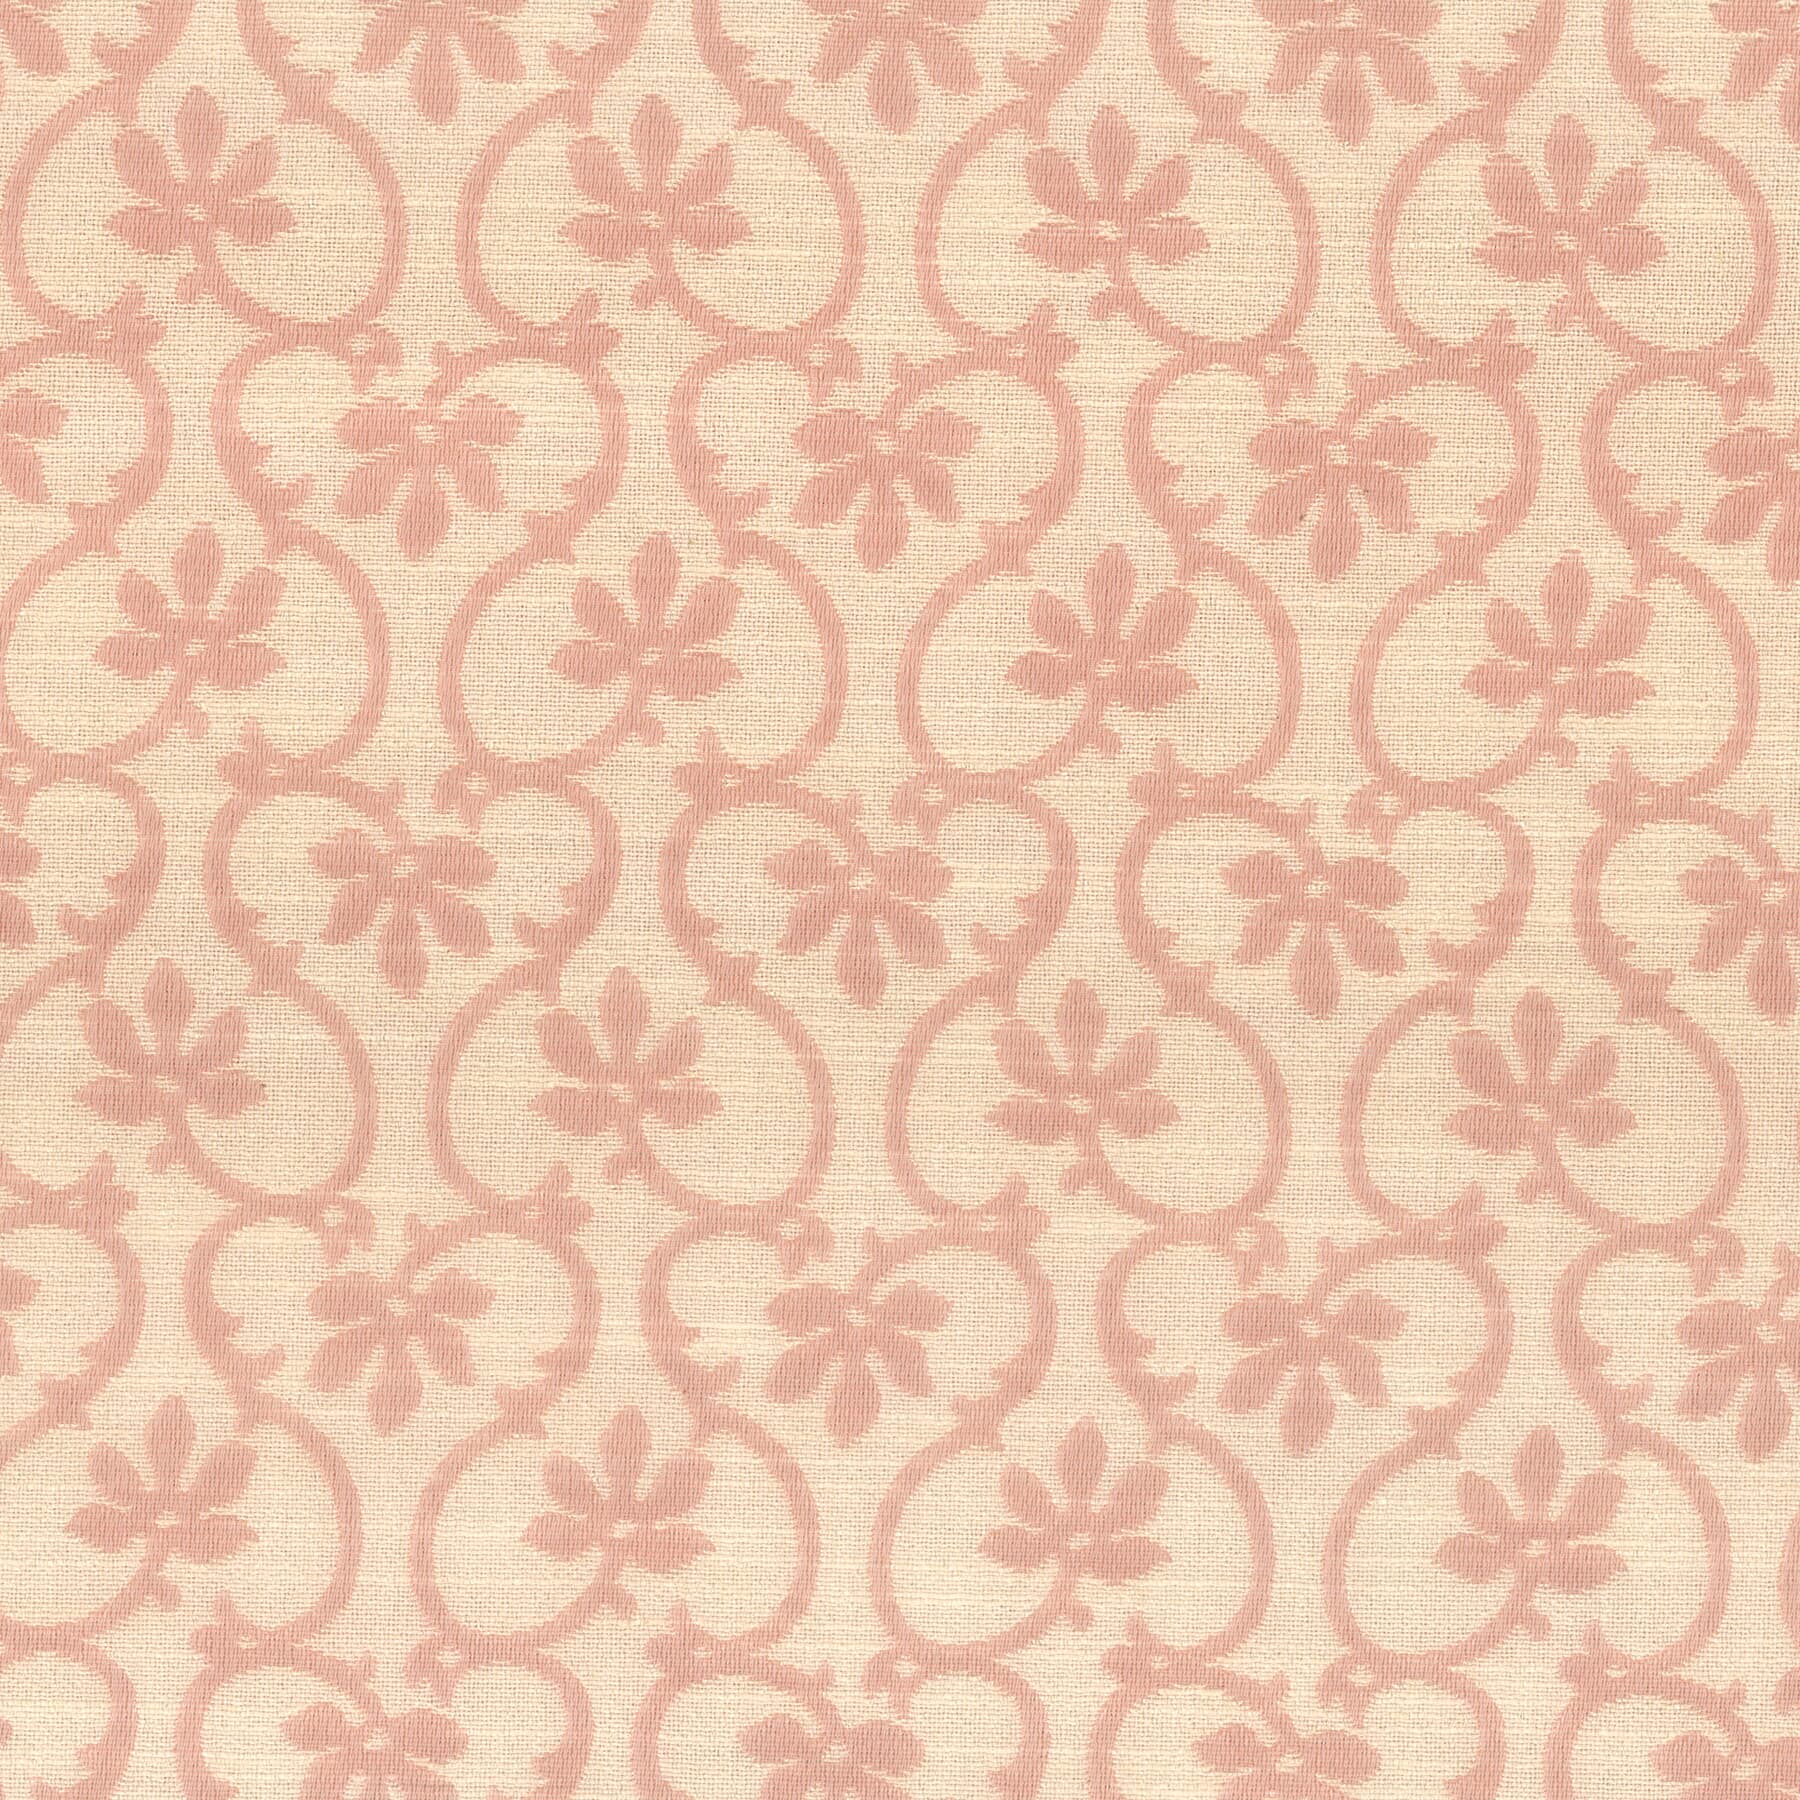 7615-05 Floral Scroll by Stout Fabric